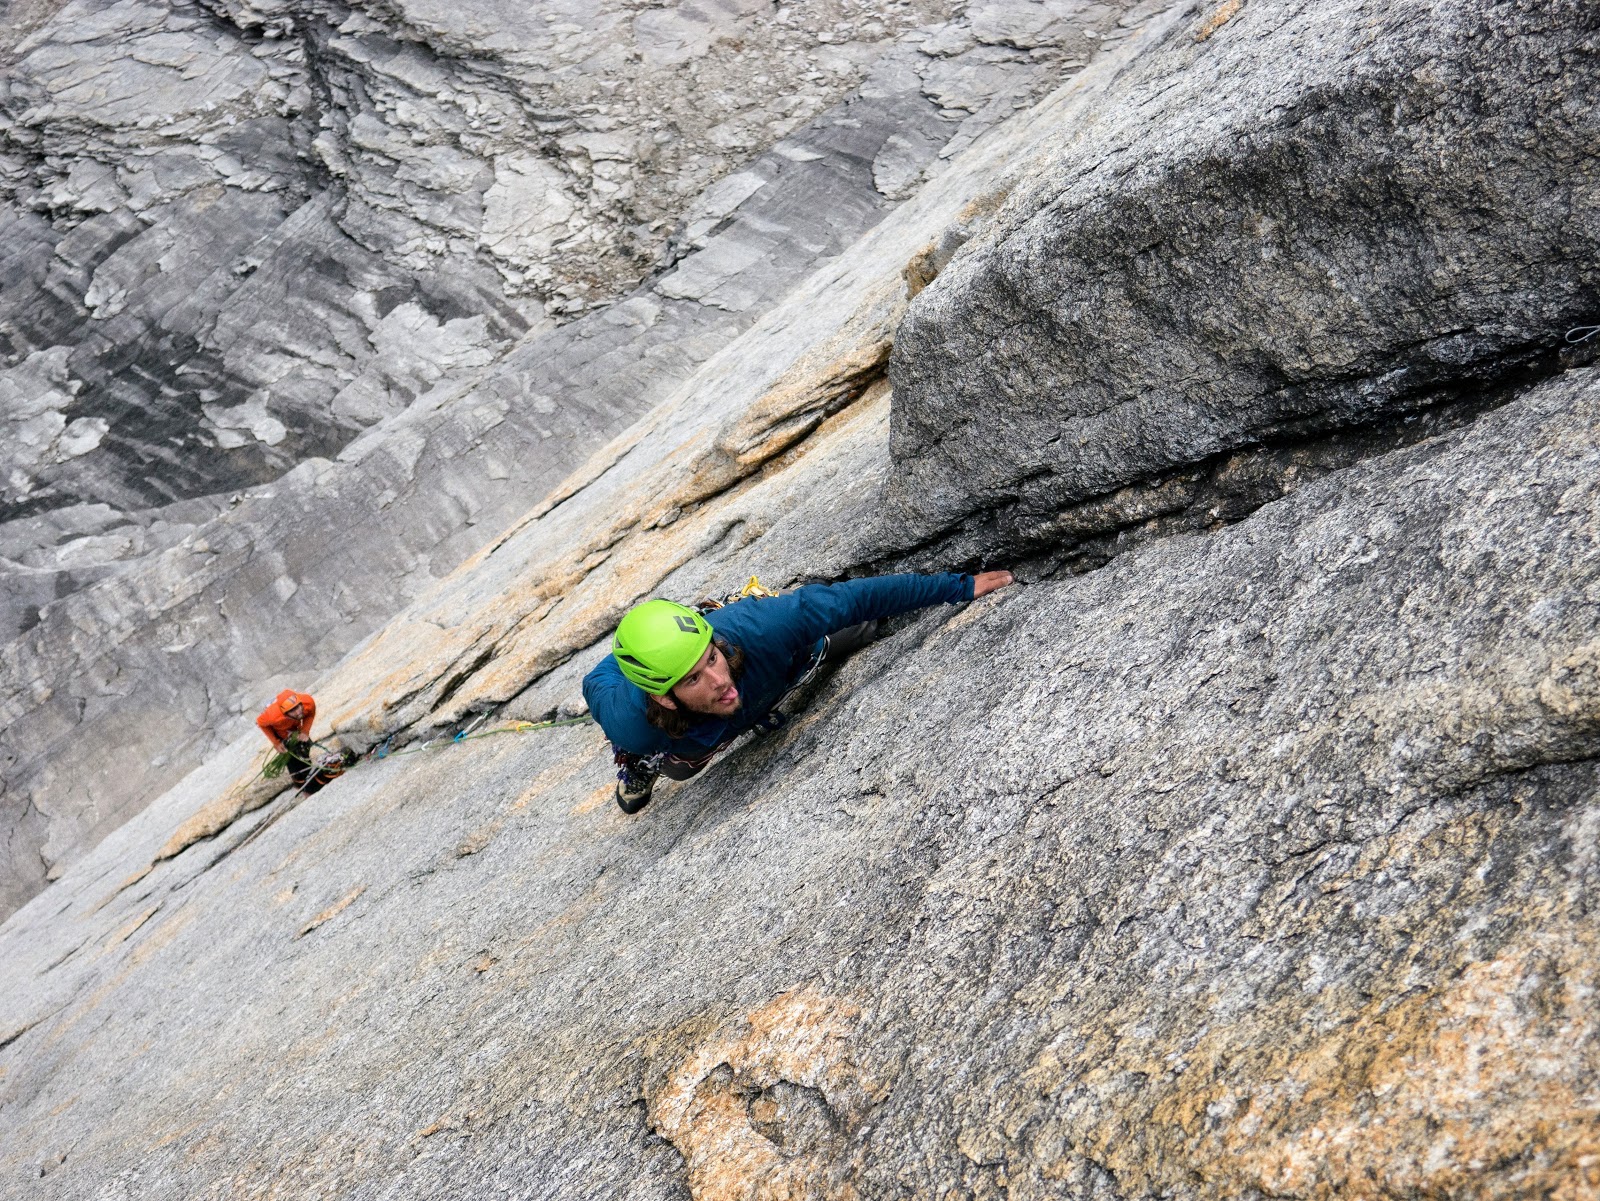 Gabe Boning contemplates the seeping Butt Crack pitch of Golden Petals (V 5.13+ or 5.12 A0, 14 pitches). [Photo] Engberg, Bain, Boning and Braasch collection